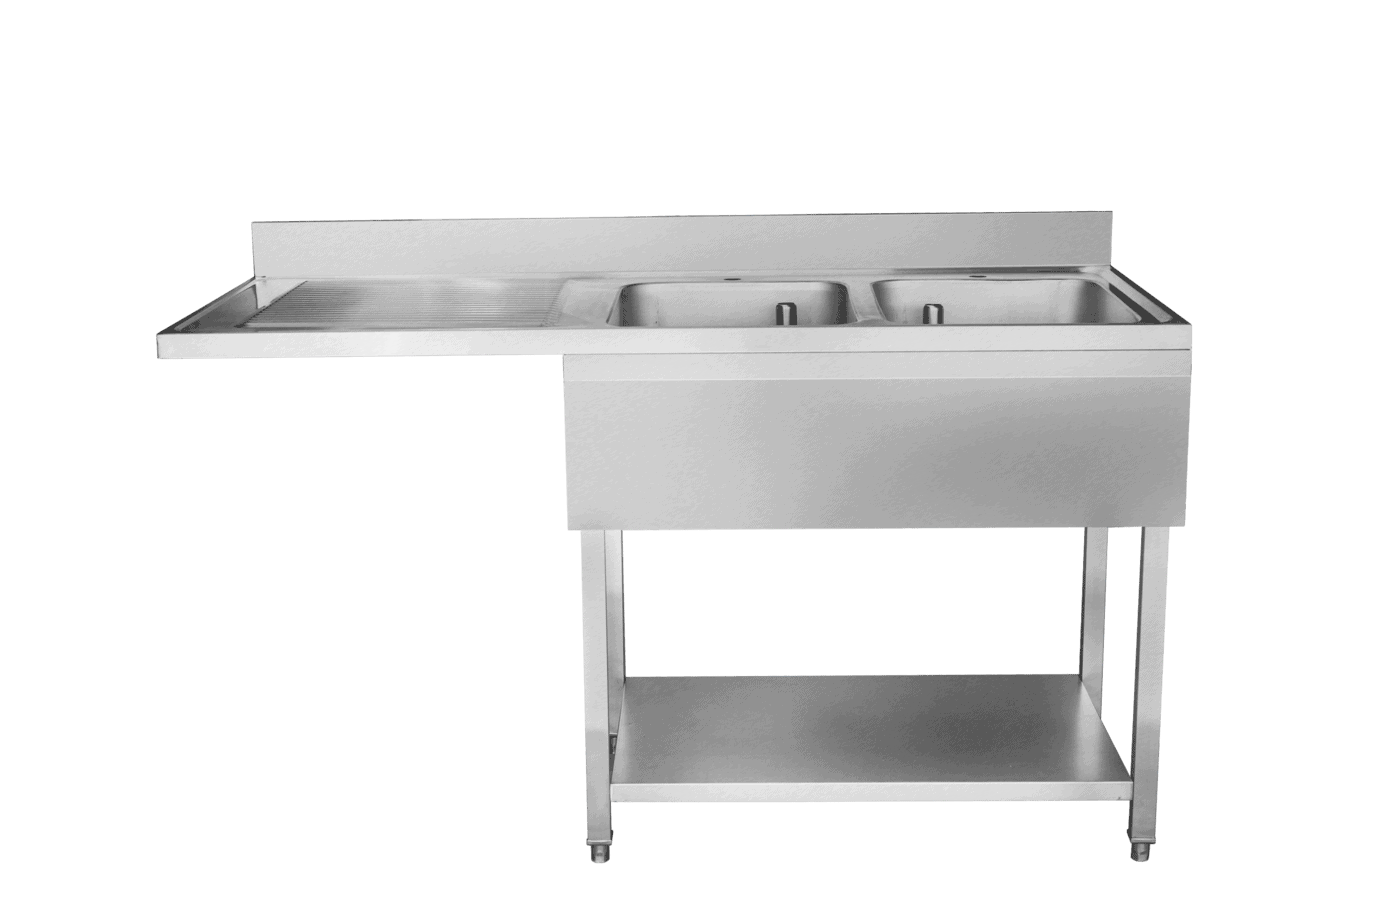 Commercial Dishwasher Sink Double Bowl - commercial catering sinks